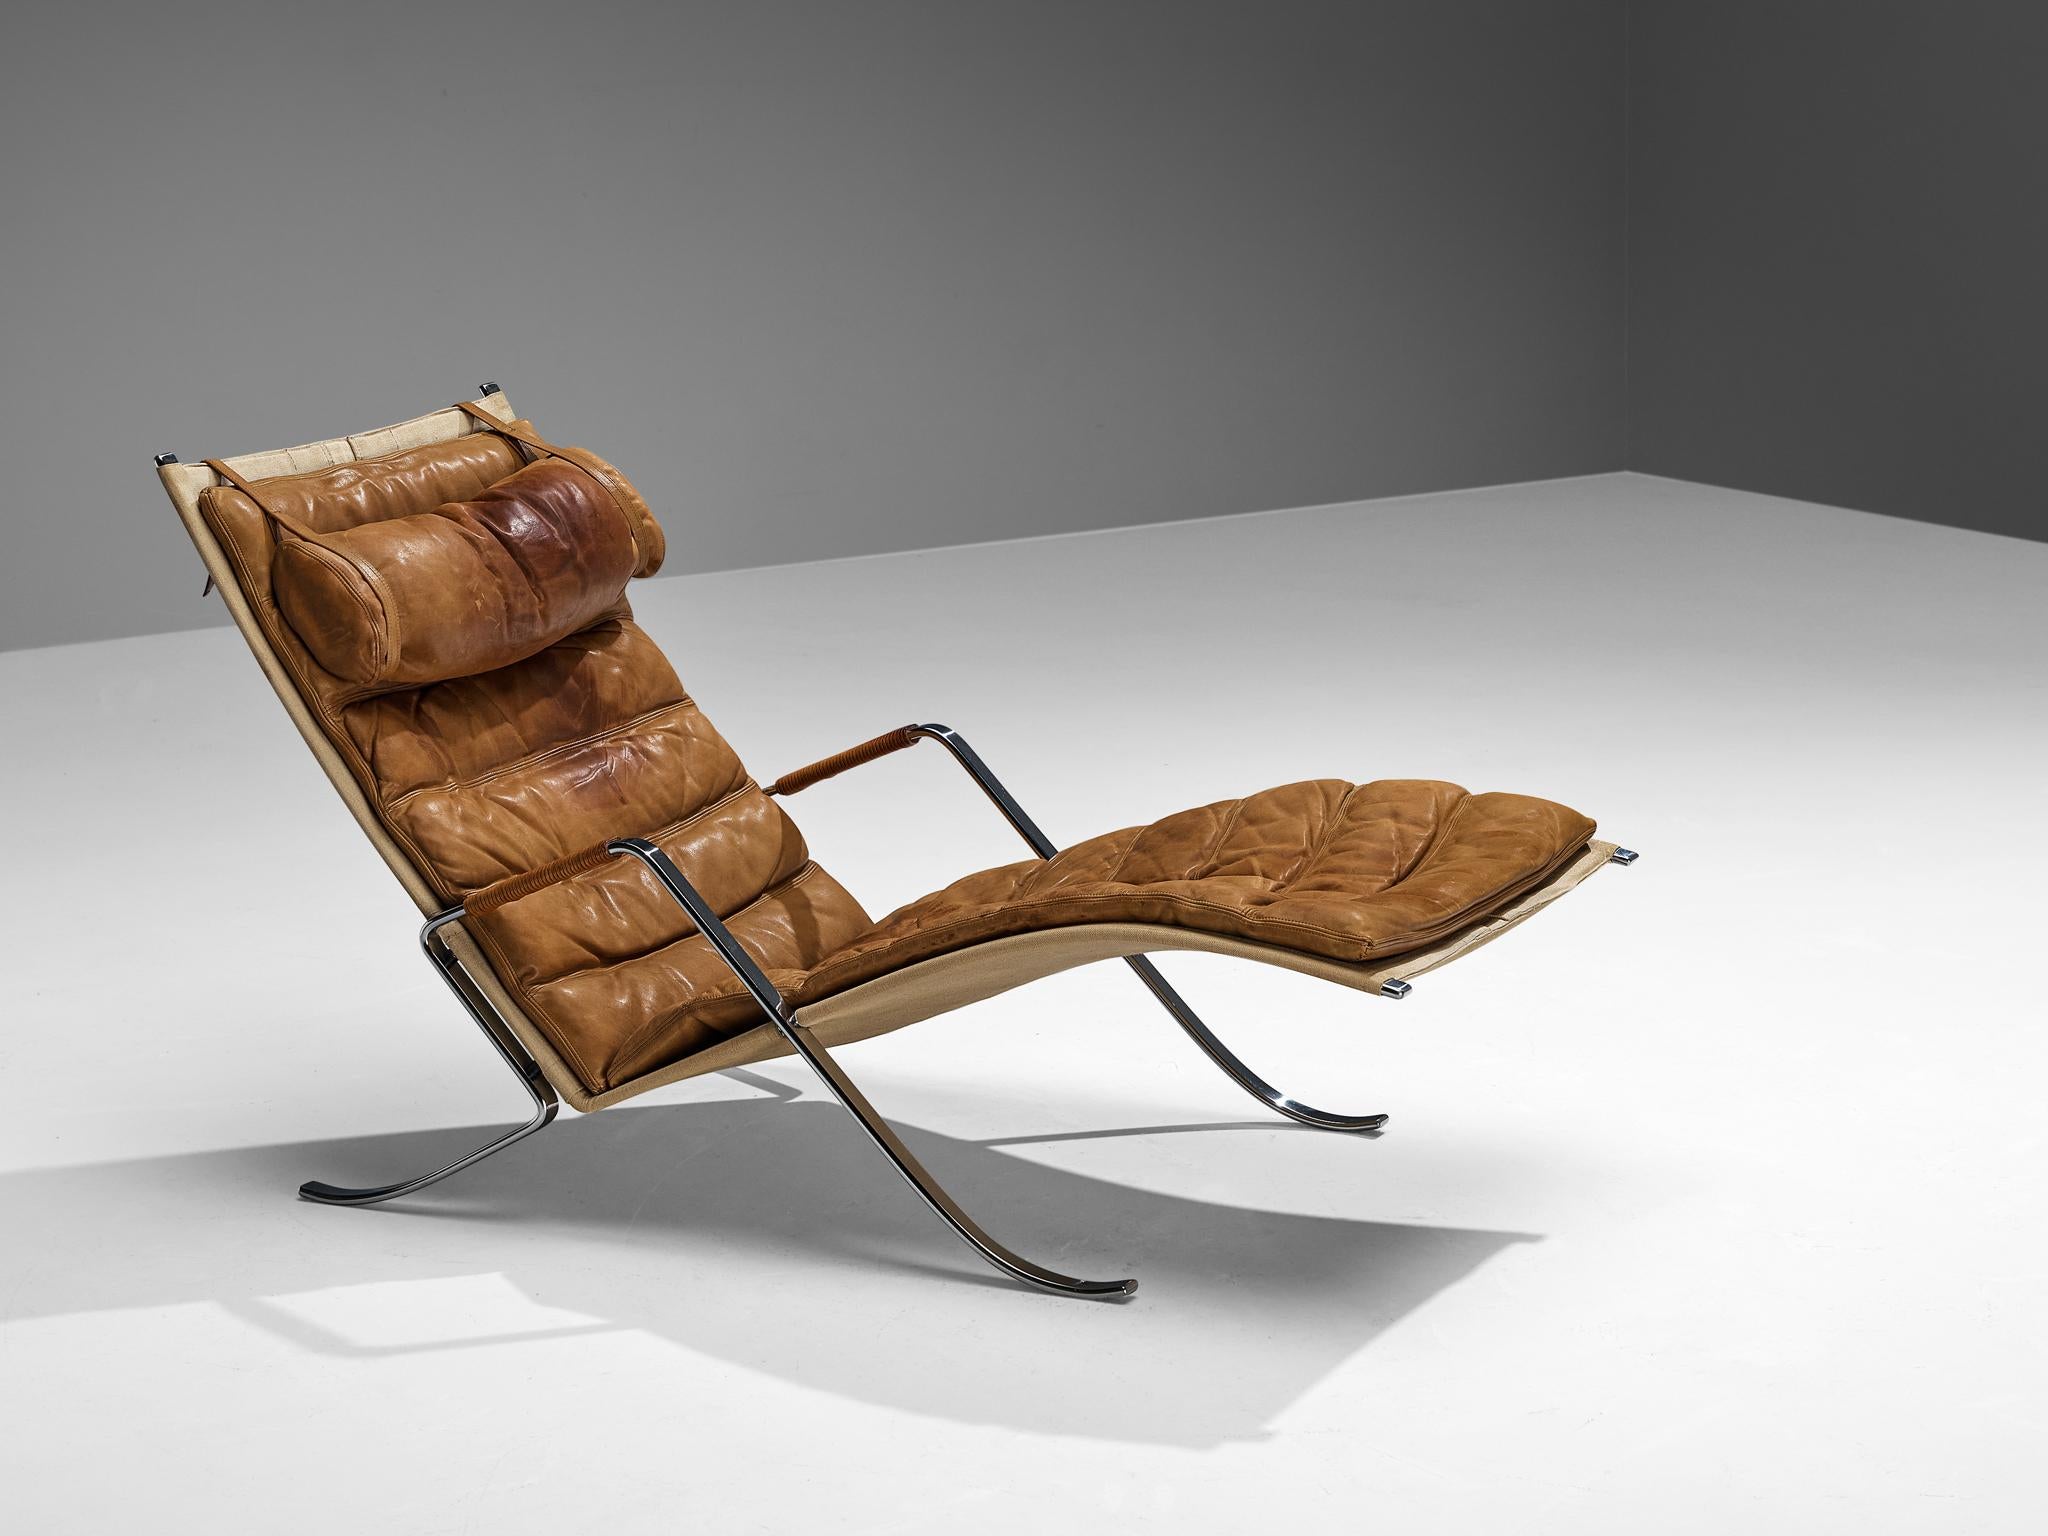 Steel Kastholm & Fabricius Early 'Grasshopper' Lounge Chair in Cognac Leather